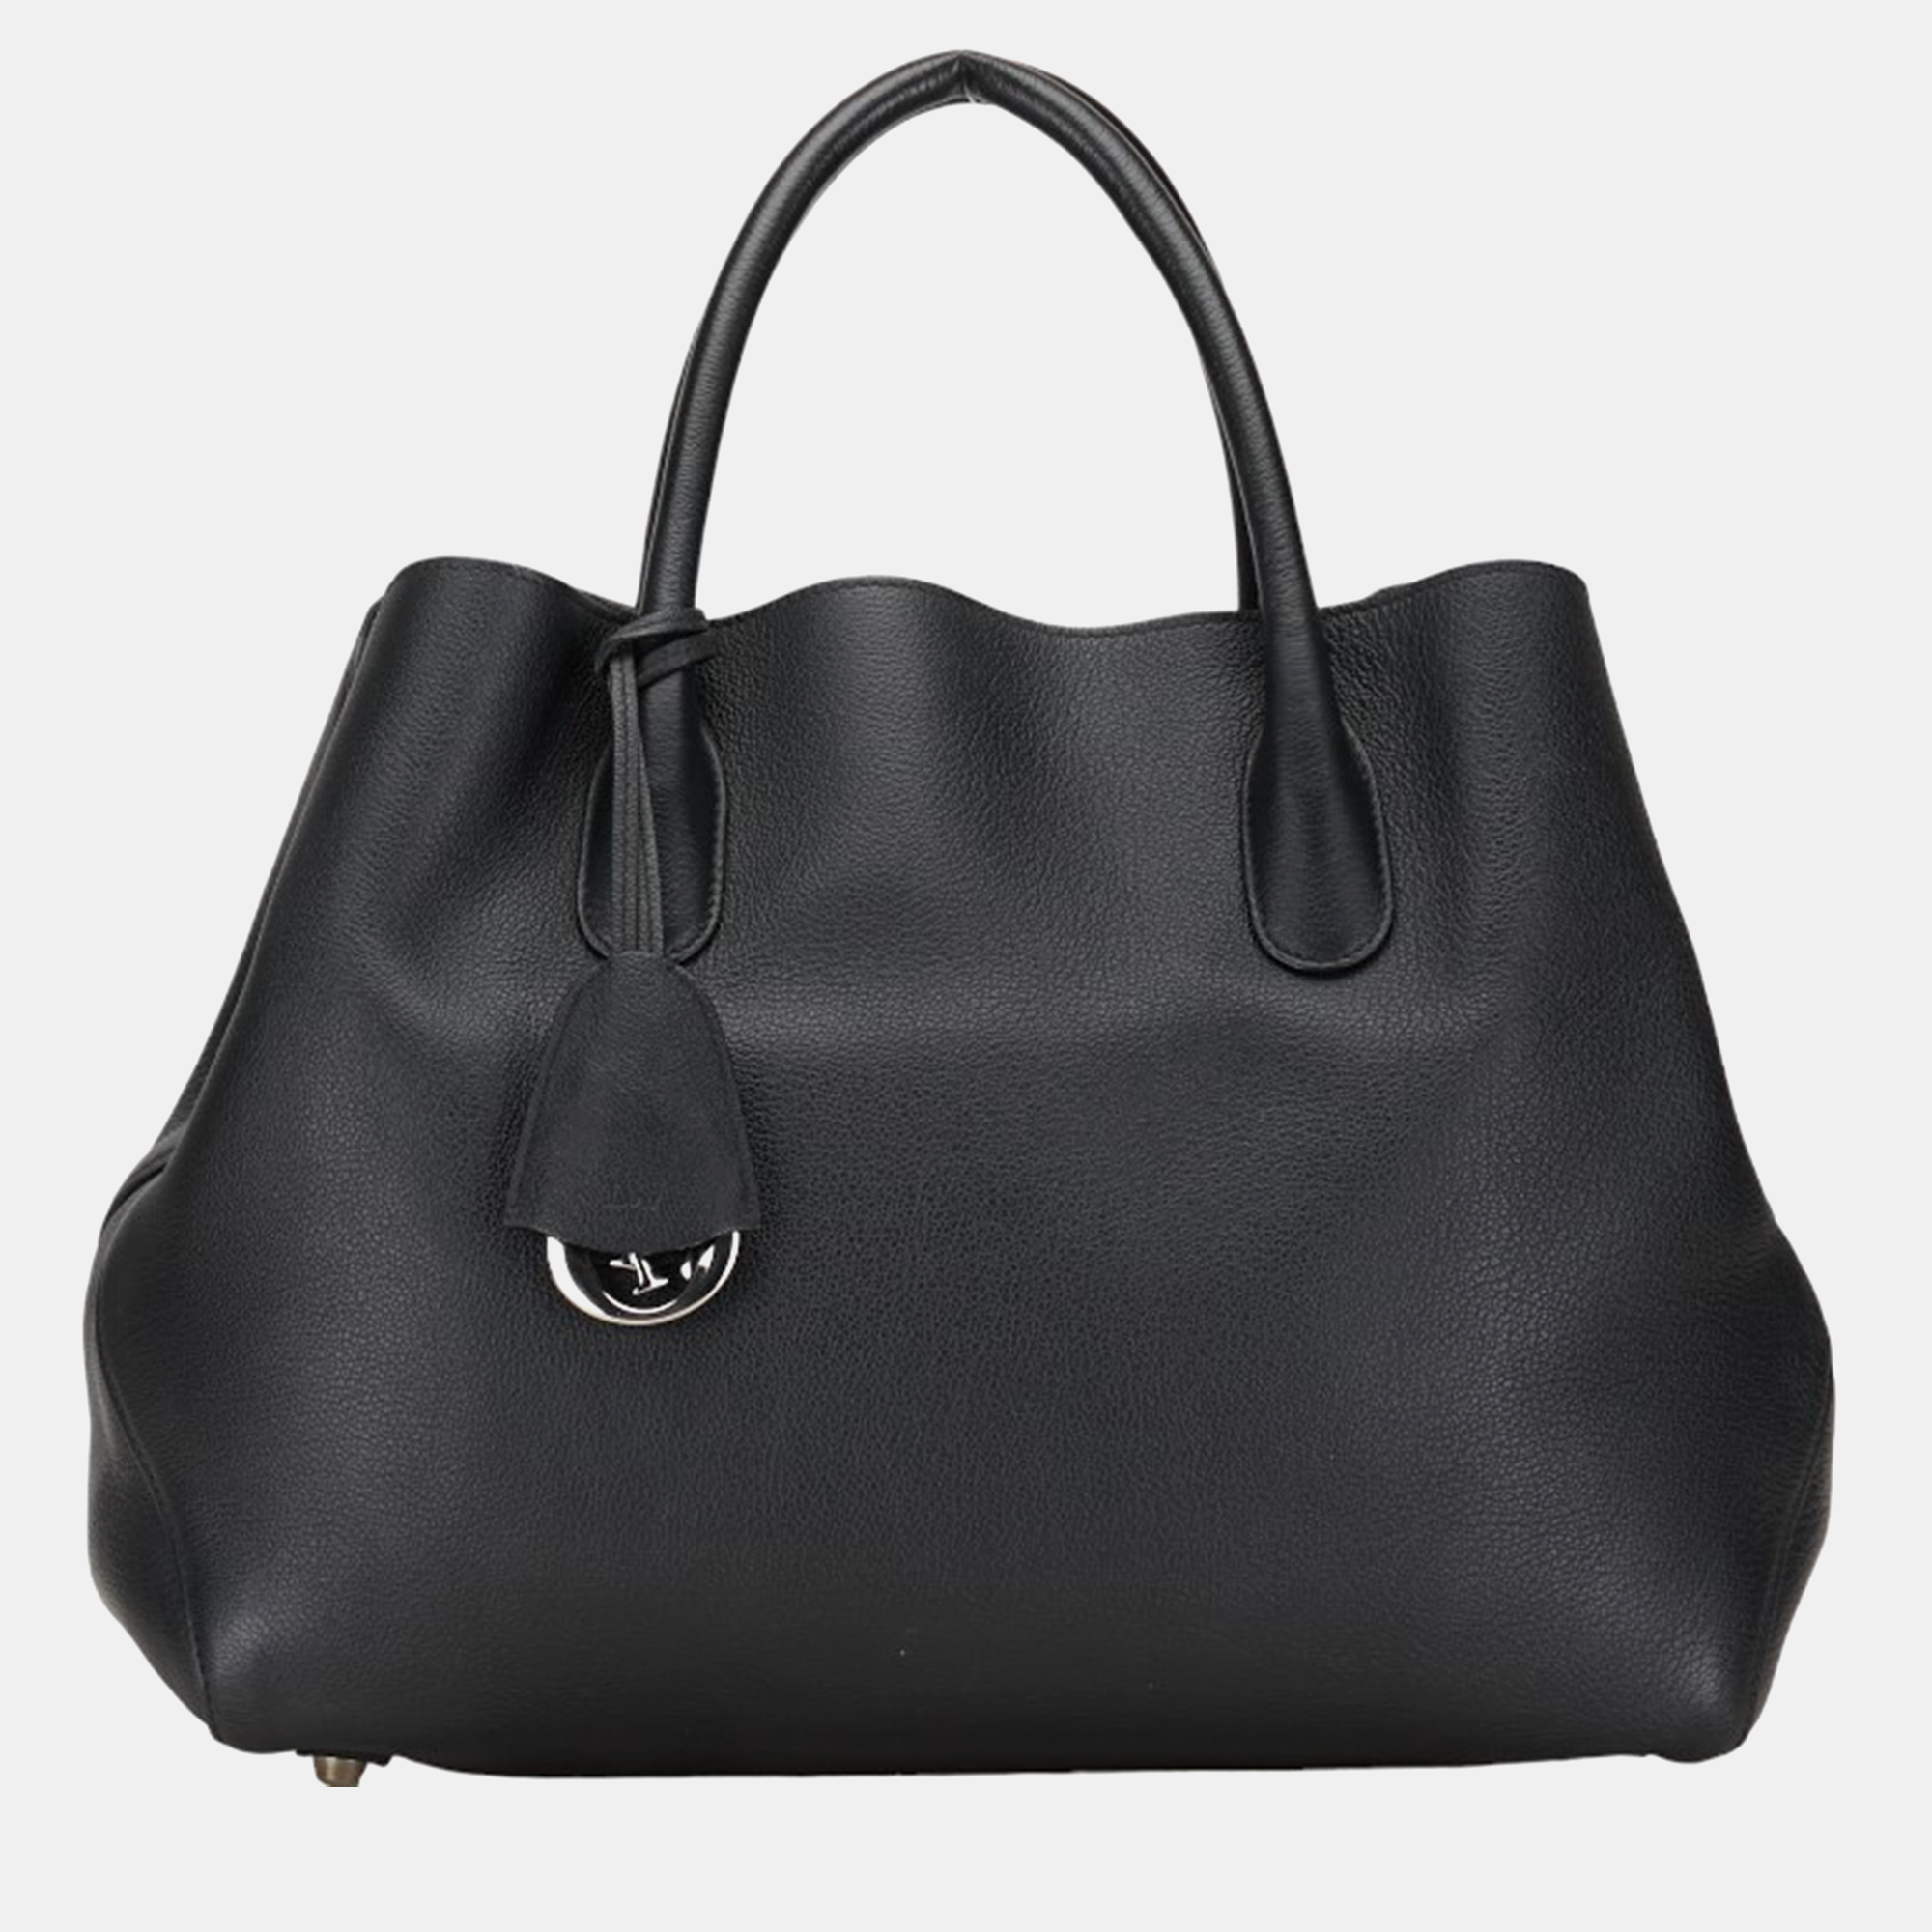 Dior black leather leather open bar tote bag